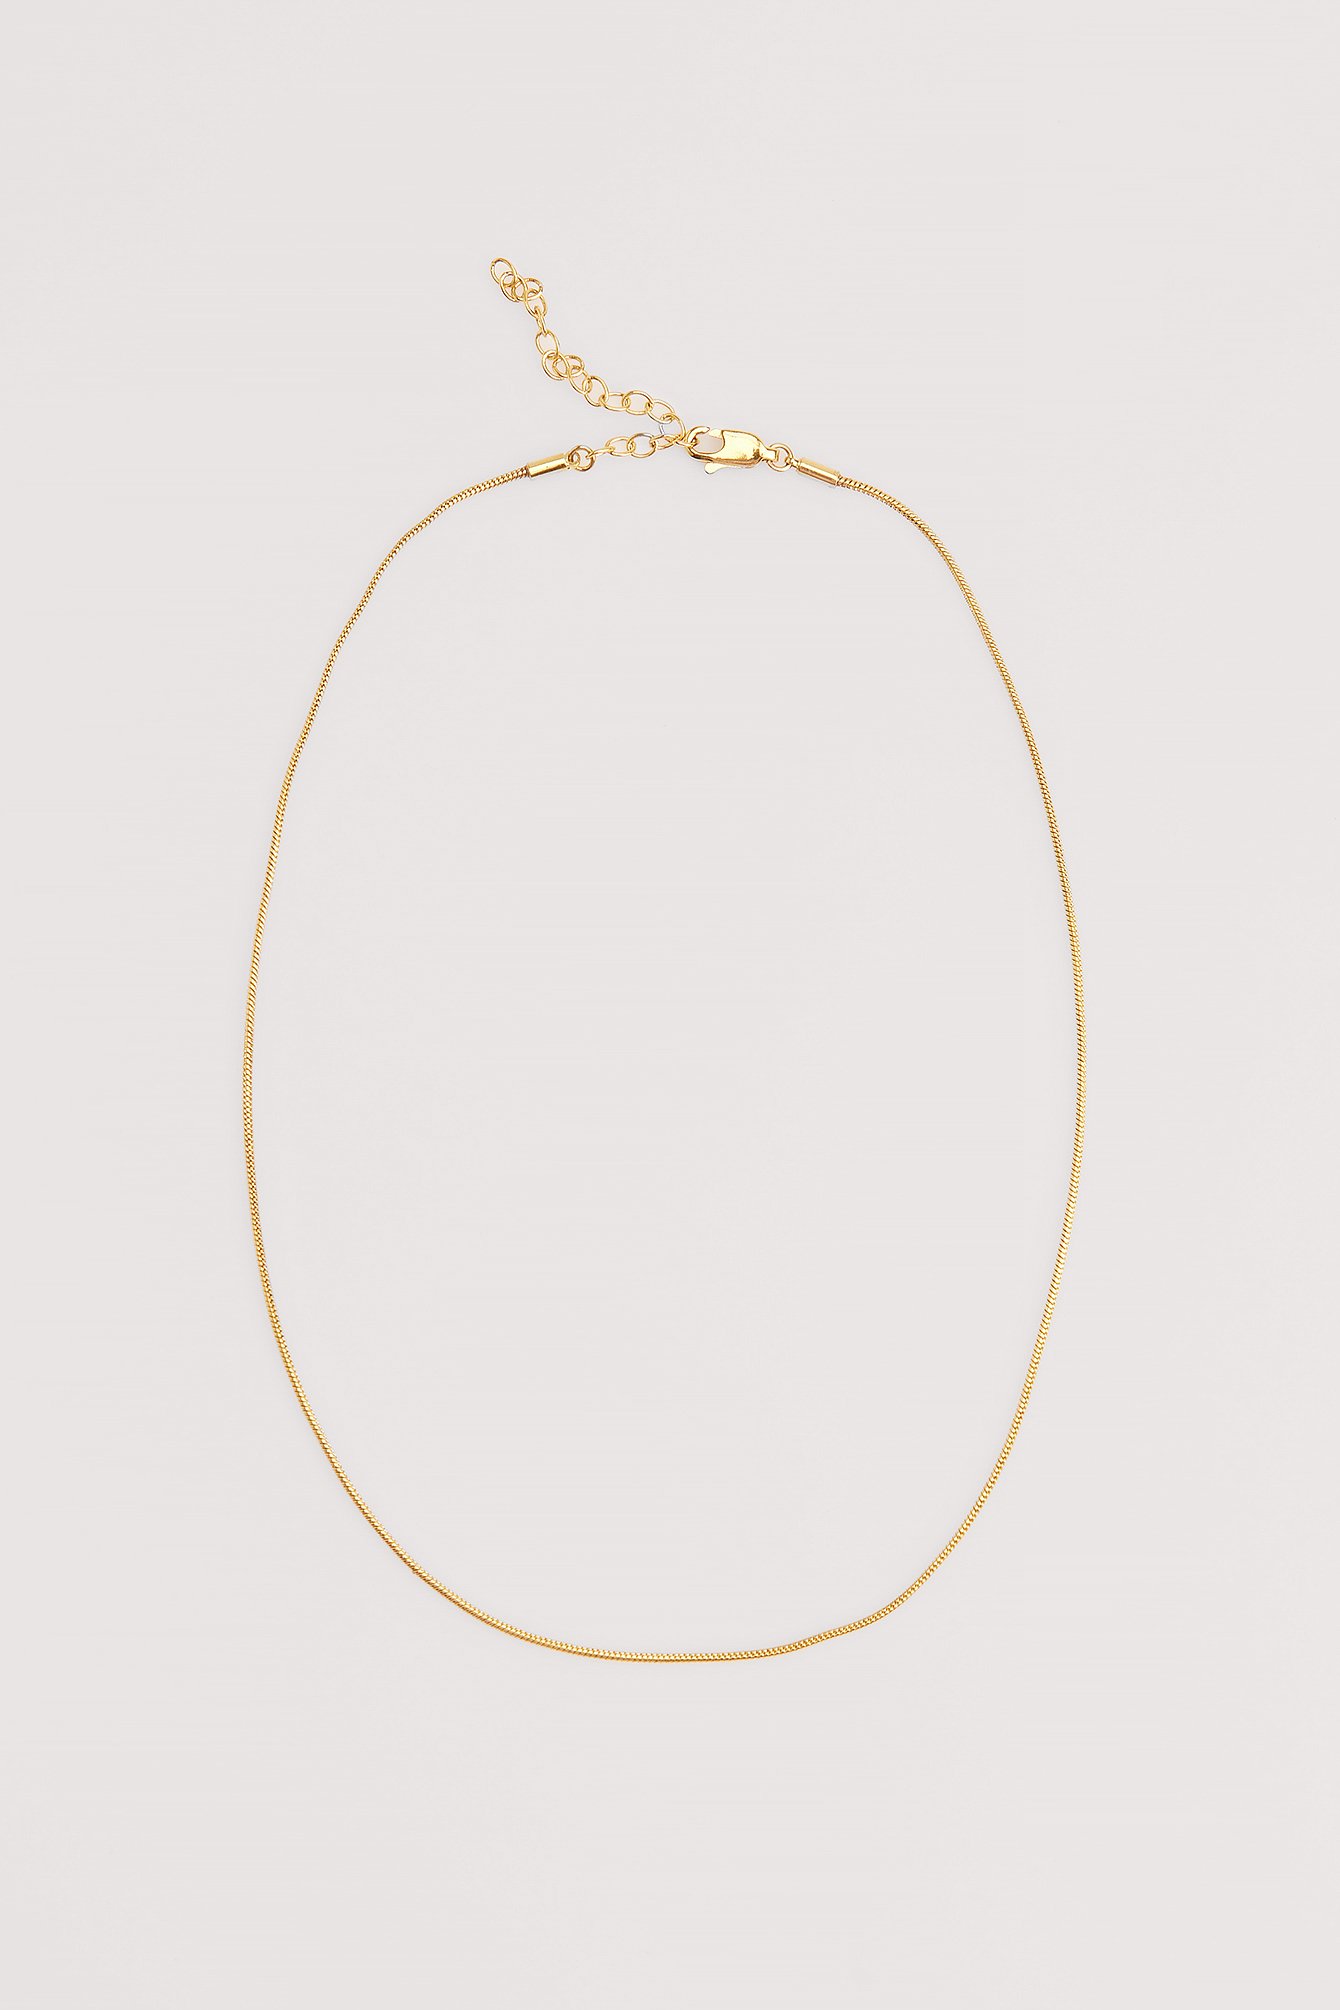 Gold Gold Plated Snake Chain Choker